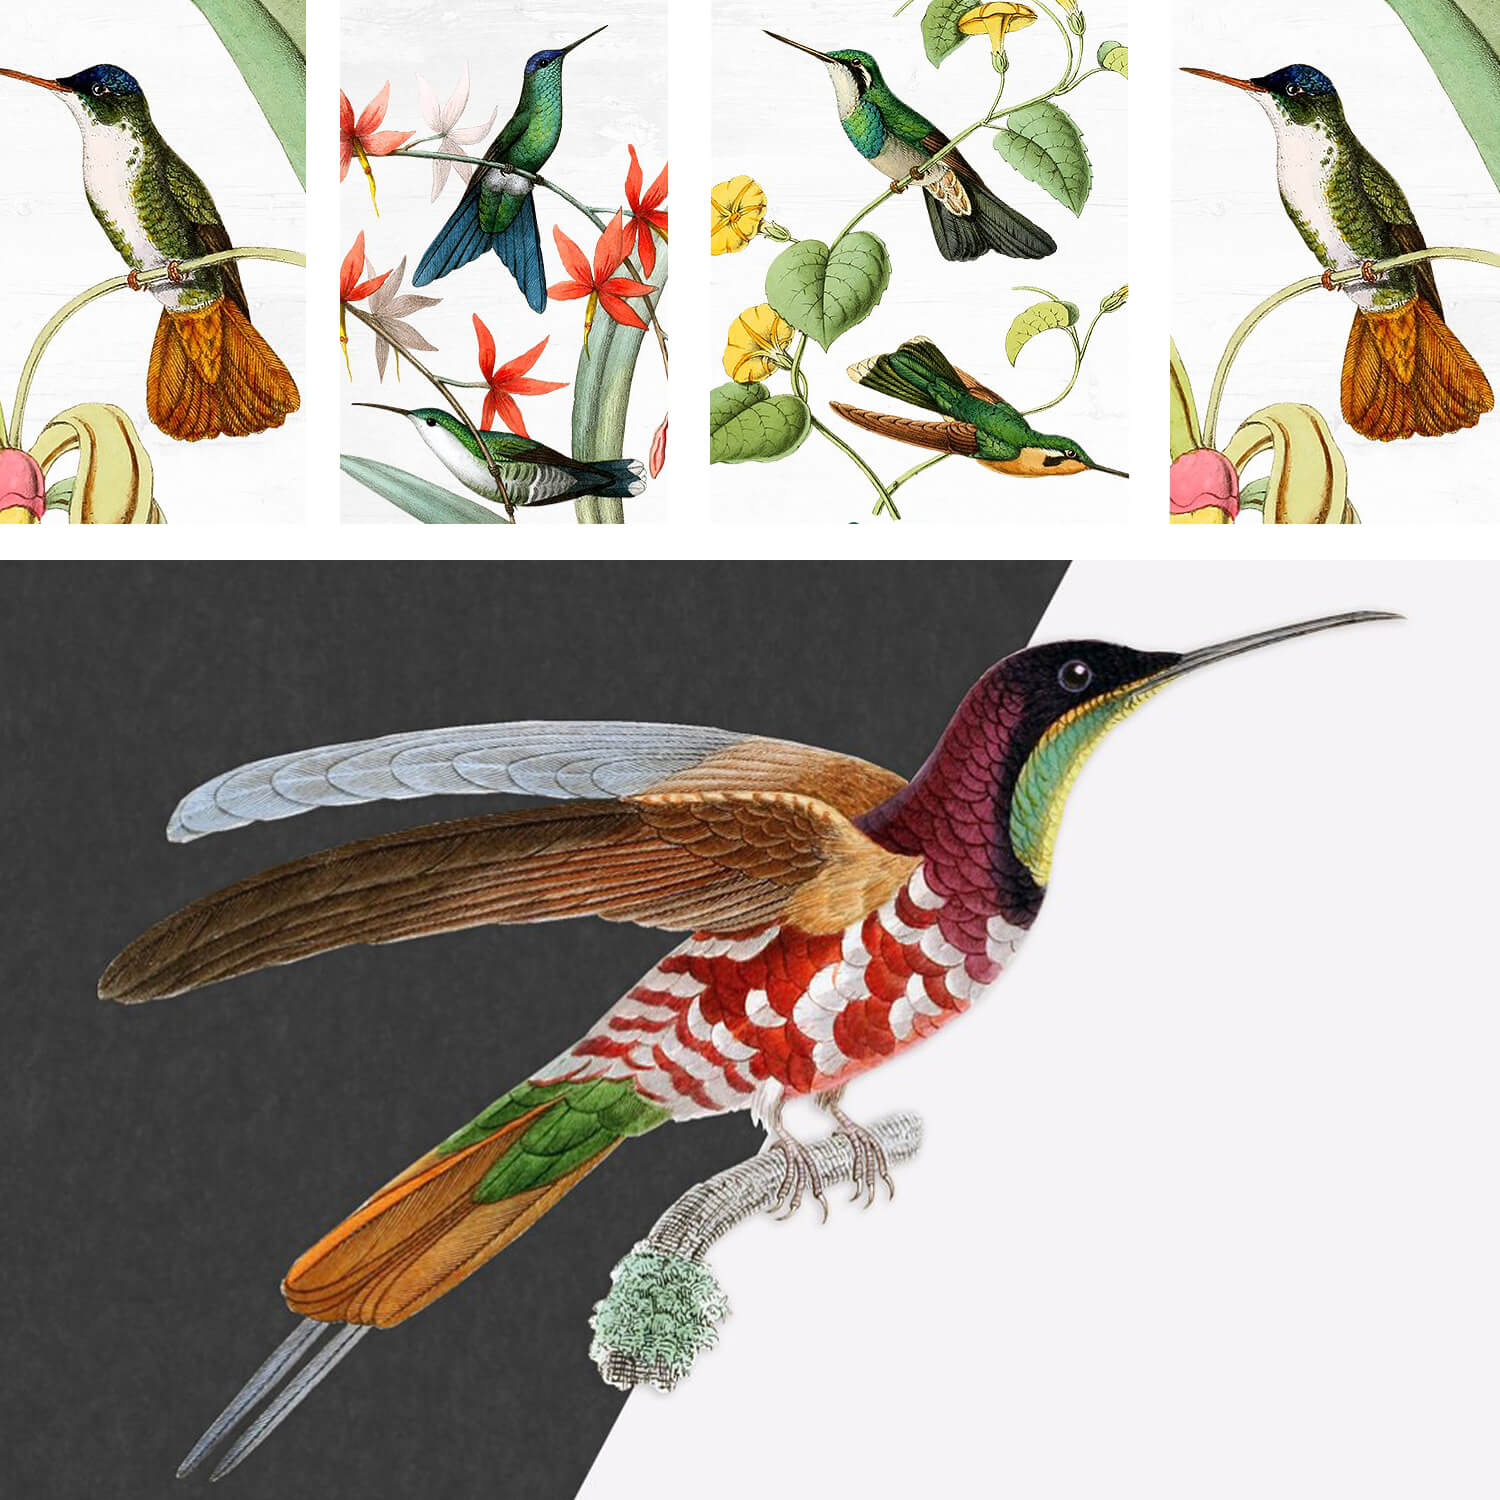 Four hummingbirds in small drawings and one in a large one.